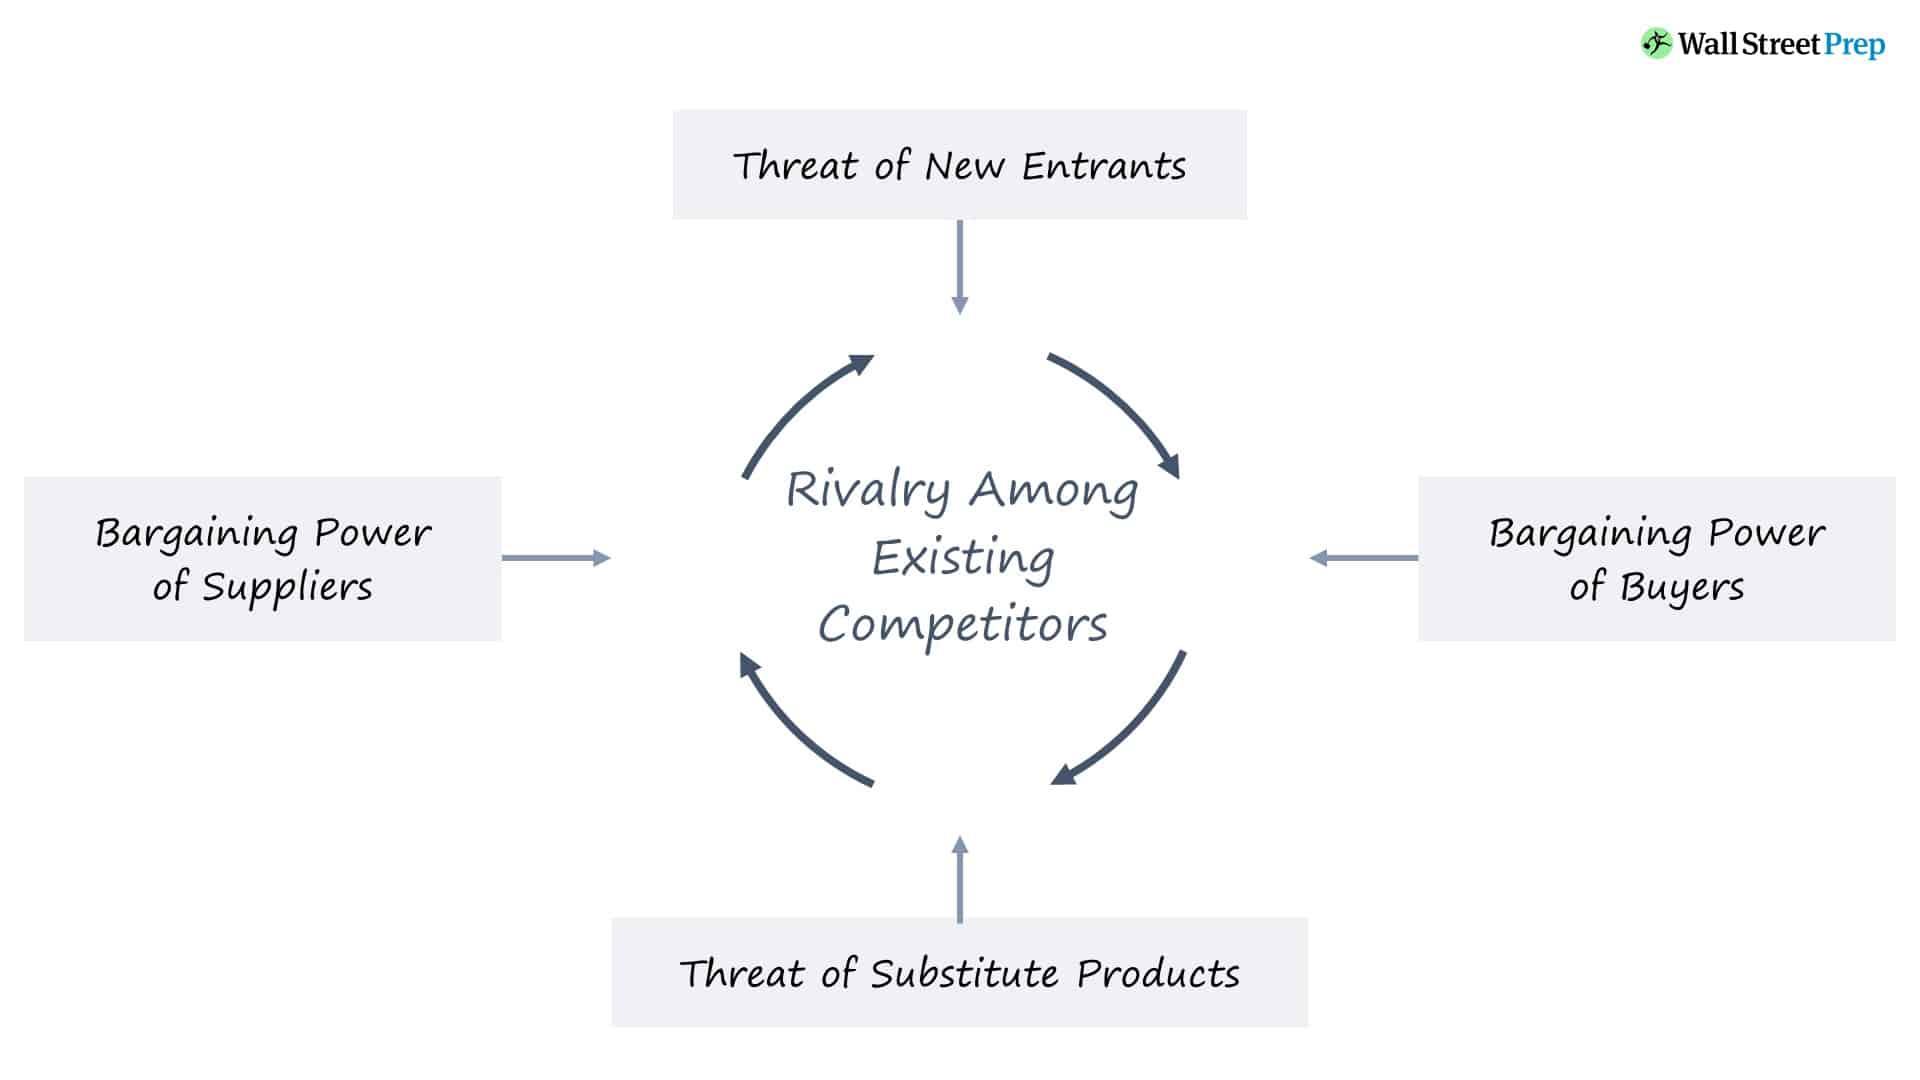 Competition from multiple areas requires competitor content analysis